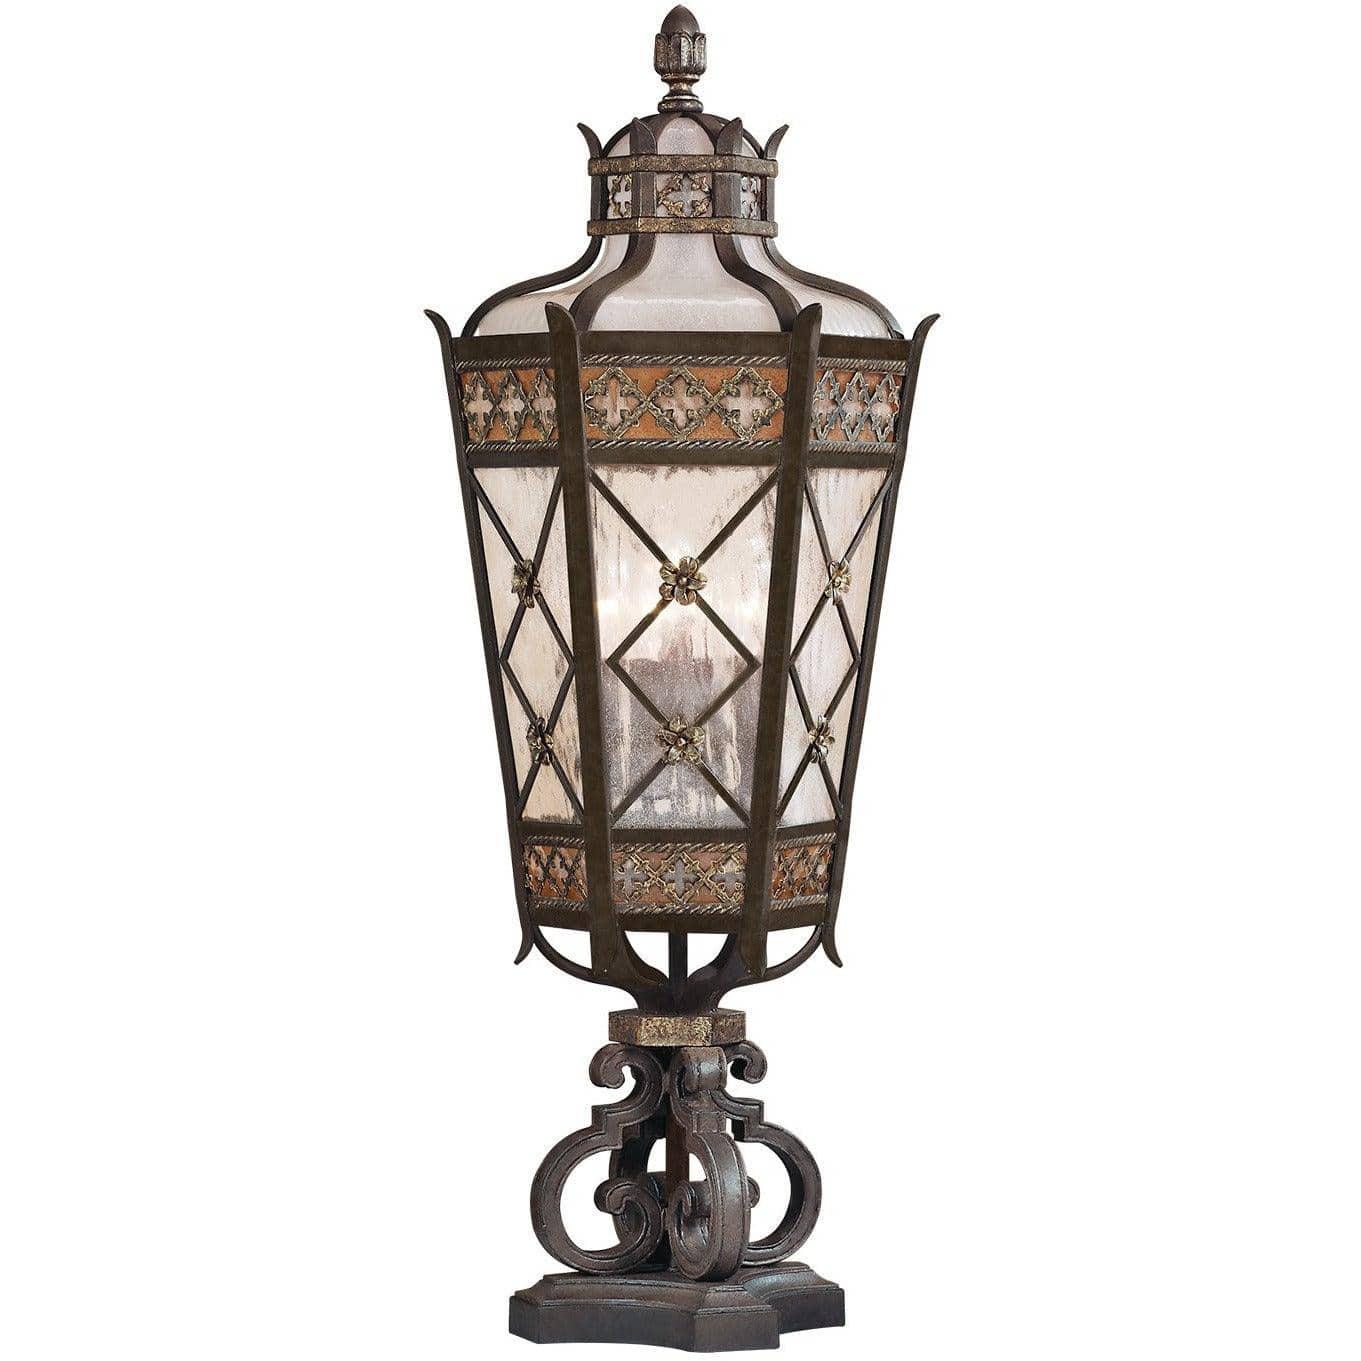 Fine Art Handcrafted Lighting - Chateau Outdoor 35-Inch Five Light Outdoor Pier Mount - 403983ST | Montreal Lighting & Hardware